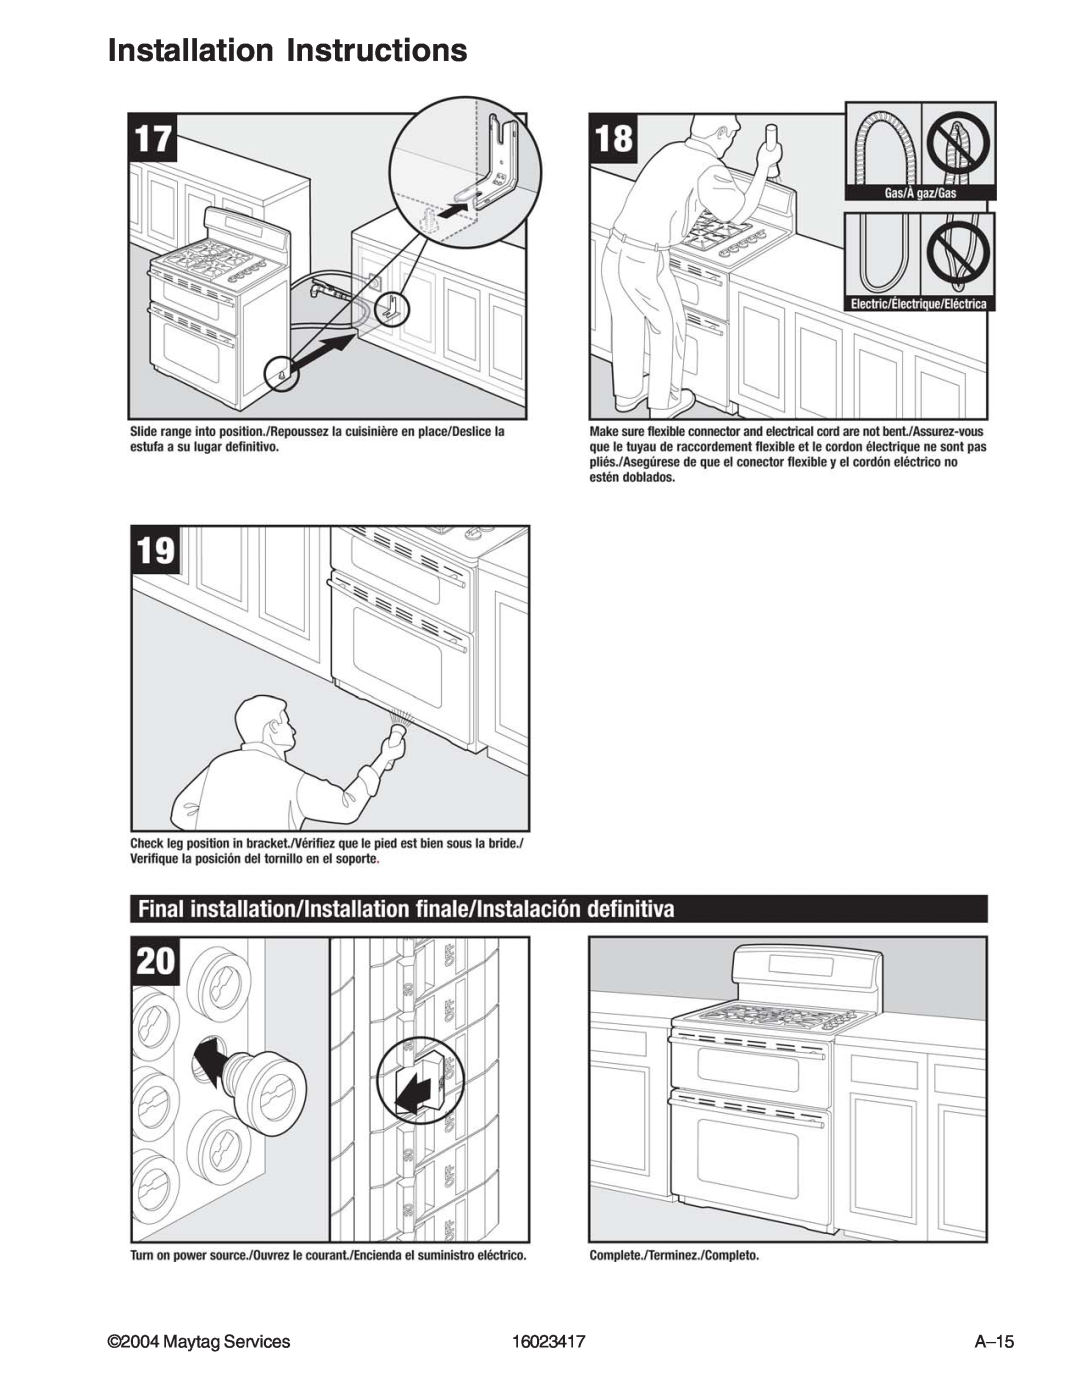 Jenn-Air JDR8895AAB/S/W, JDR8895ACS/W manual Installation Instructions, Maytag Services, 16023417, A–15 